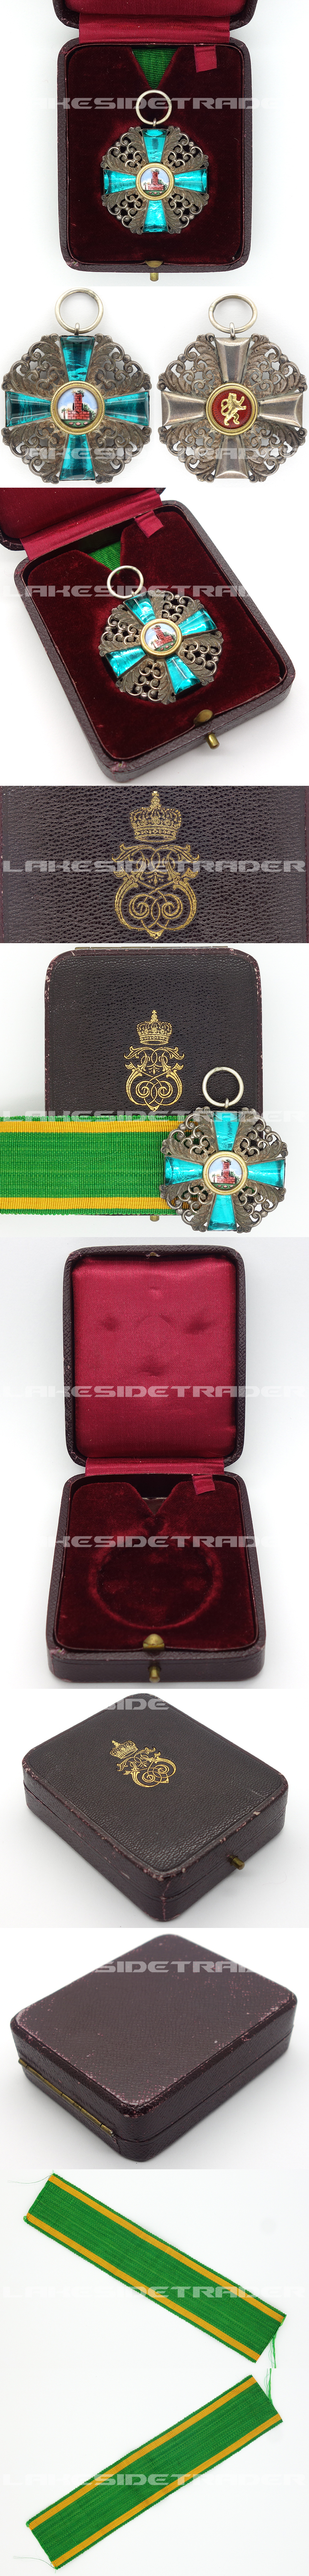 Cased Baden Knight 2nd Class Order of the Zähringer Lion